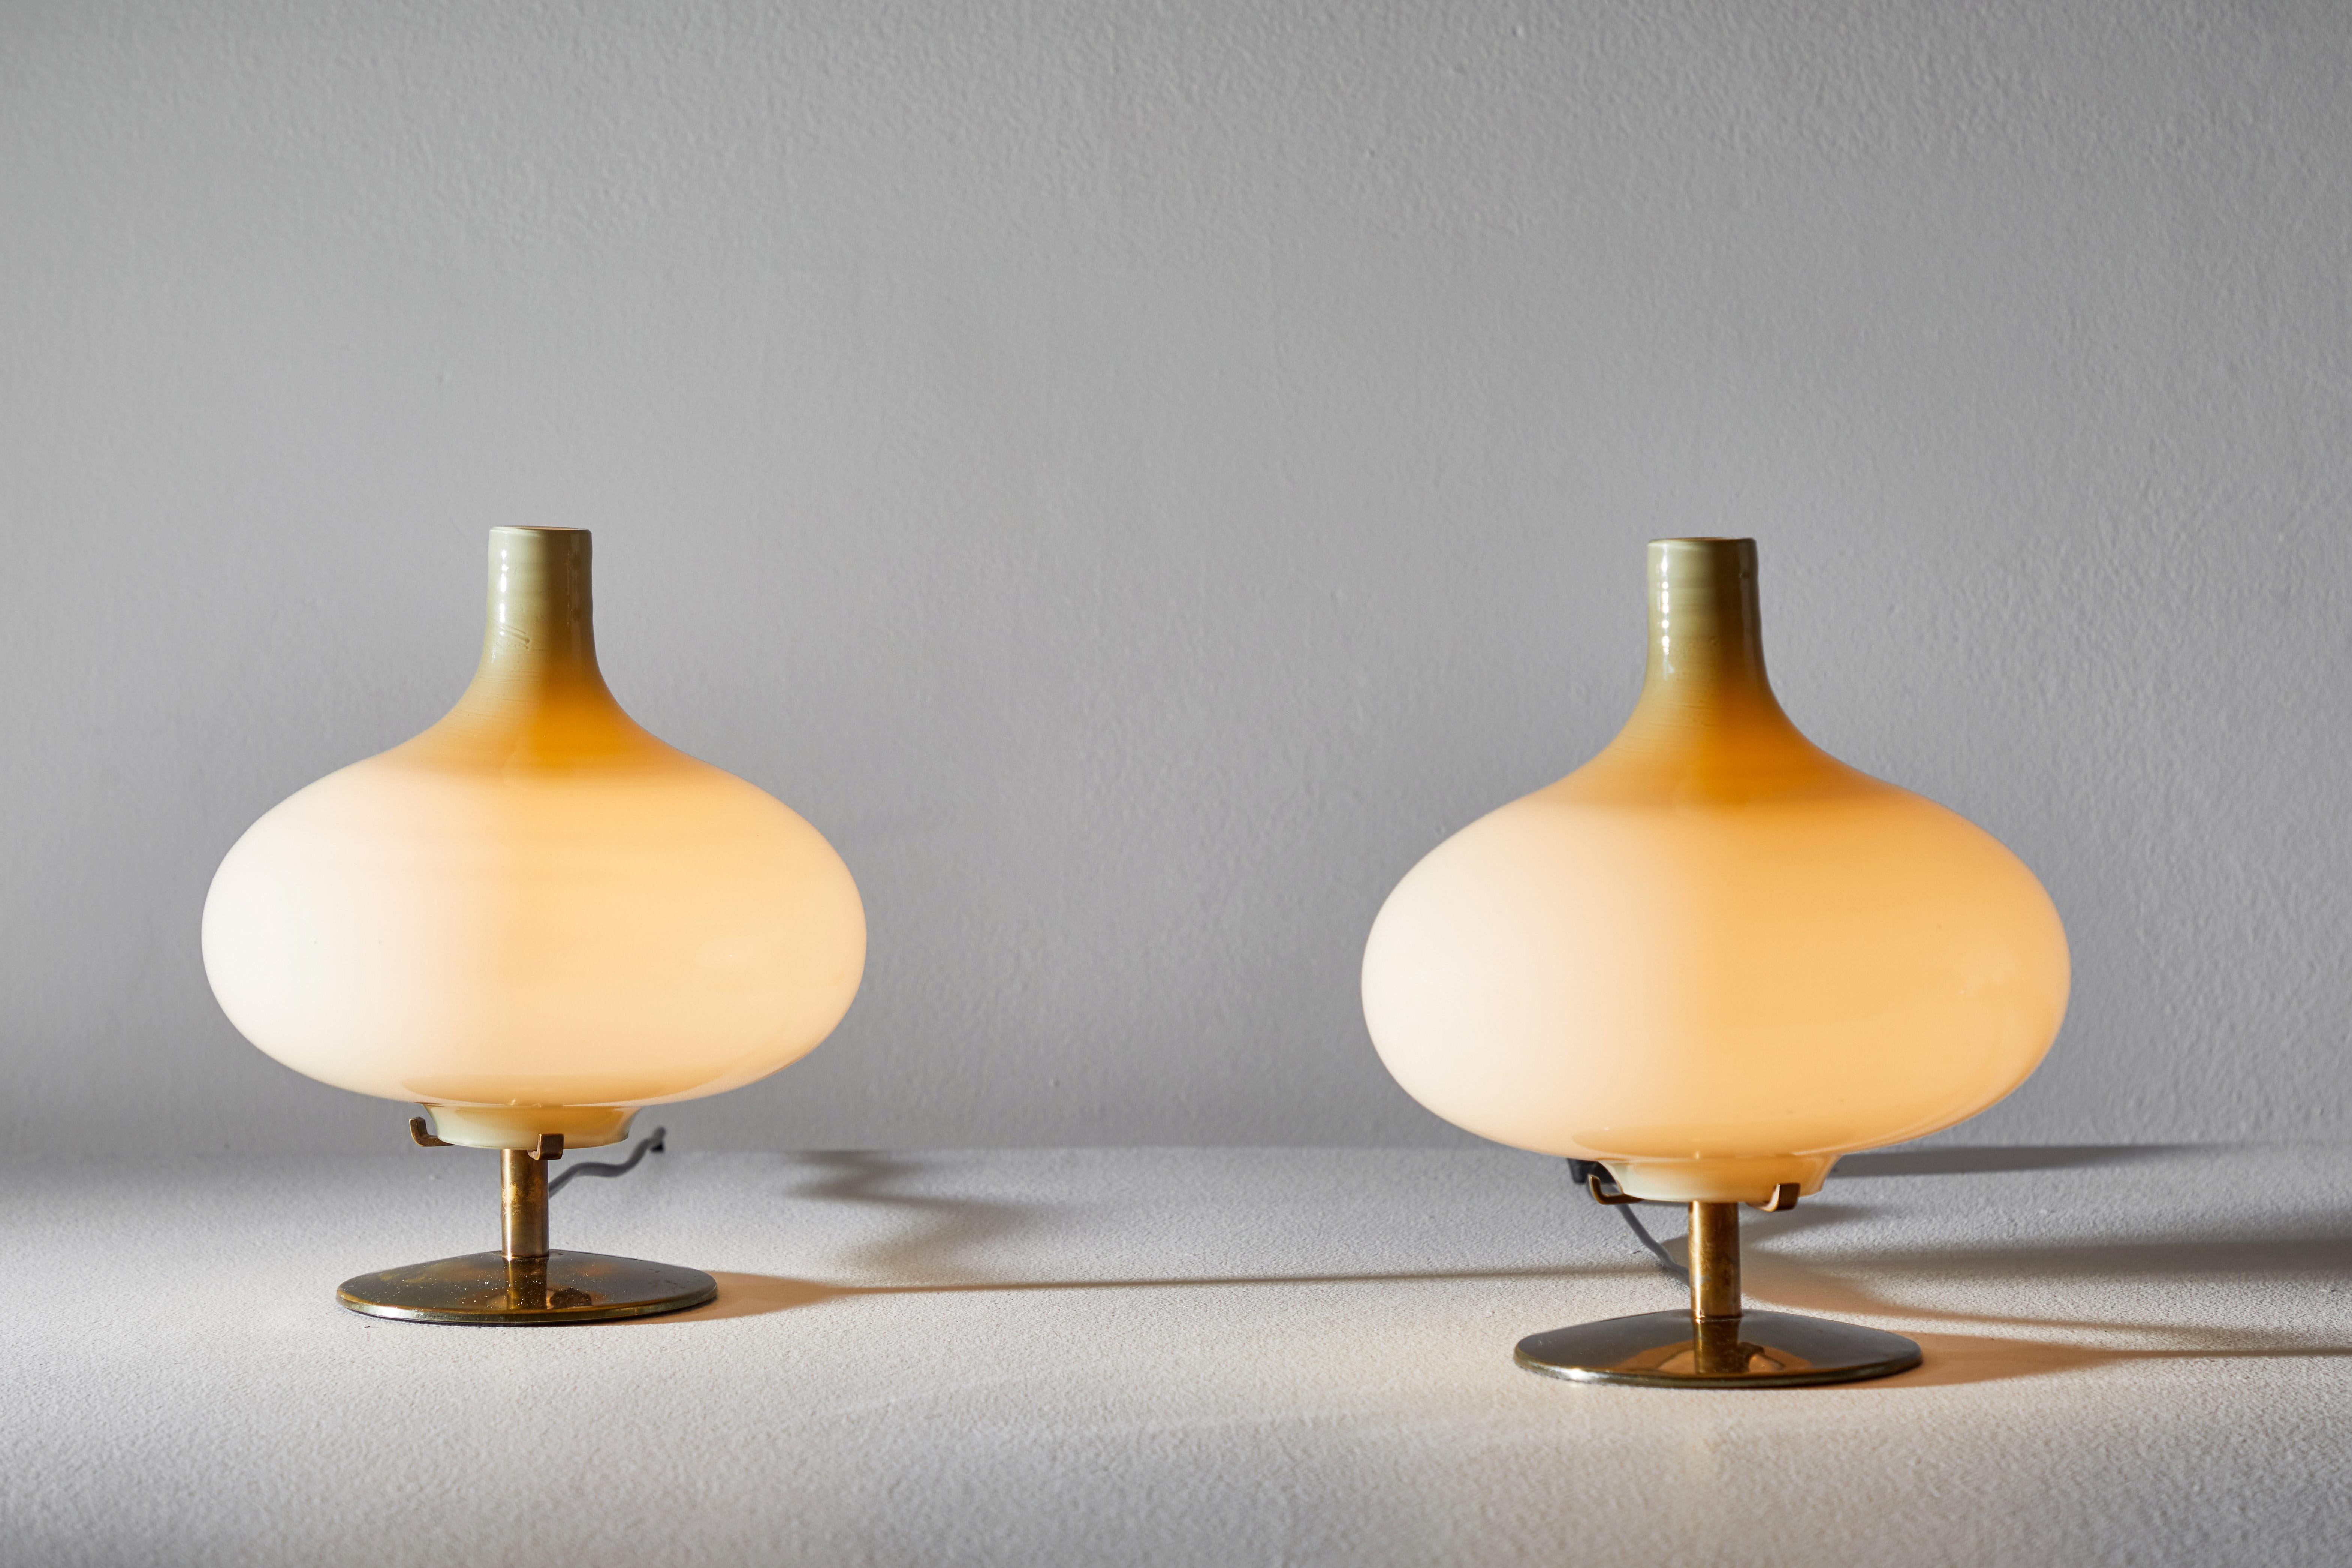 Pair of table lamps by Annig Sarian. Manufactured in Adrasteia, Italy, 1960. Brass, blown glass diffuser. Original cord. Each light takes one E27 European candelabra 60w maximum bulb. Bulbs provided as a one time courtesy. Literature: Bibliography